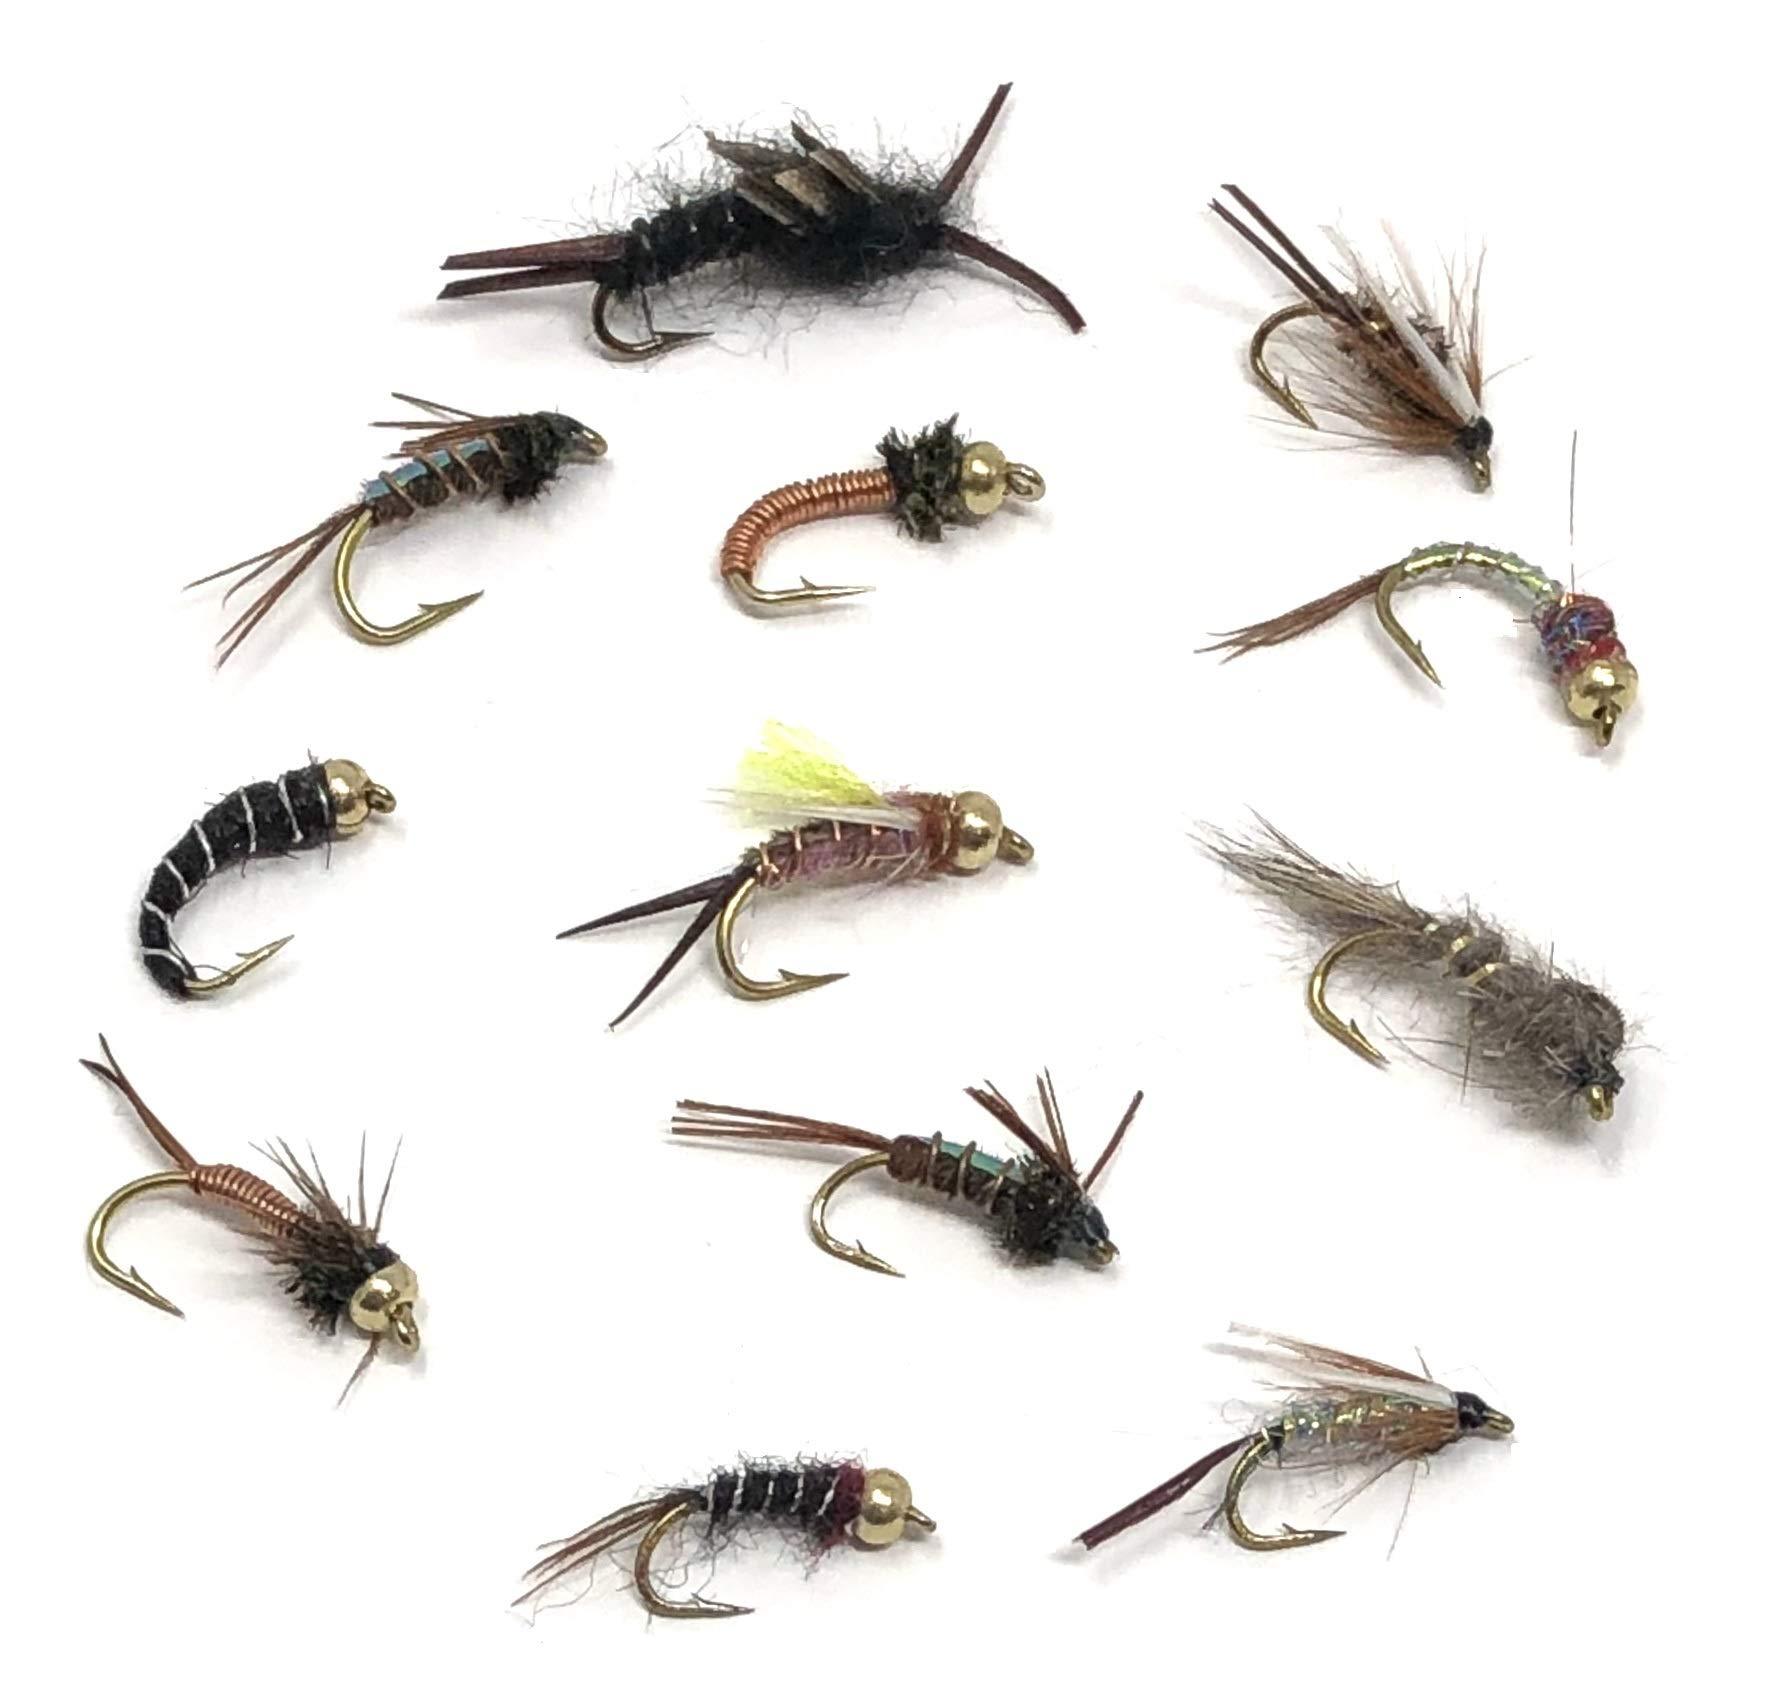 Feeder Creek Fly Fishing Lures, 9 Patterns of Dry and Wet Flies for Trout,  Bass, Salmon & Other Freshwater Fish in 4 Different Sizes, 36/72 Set